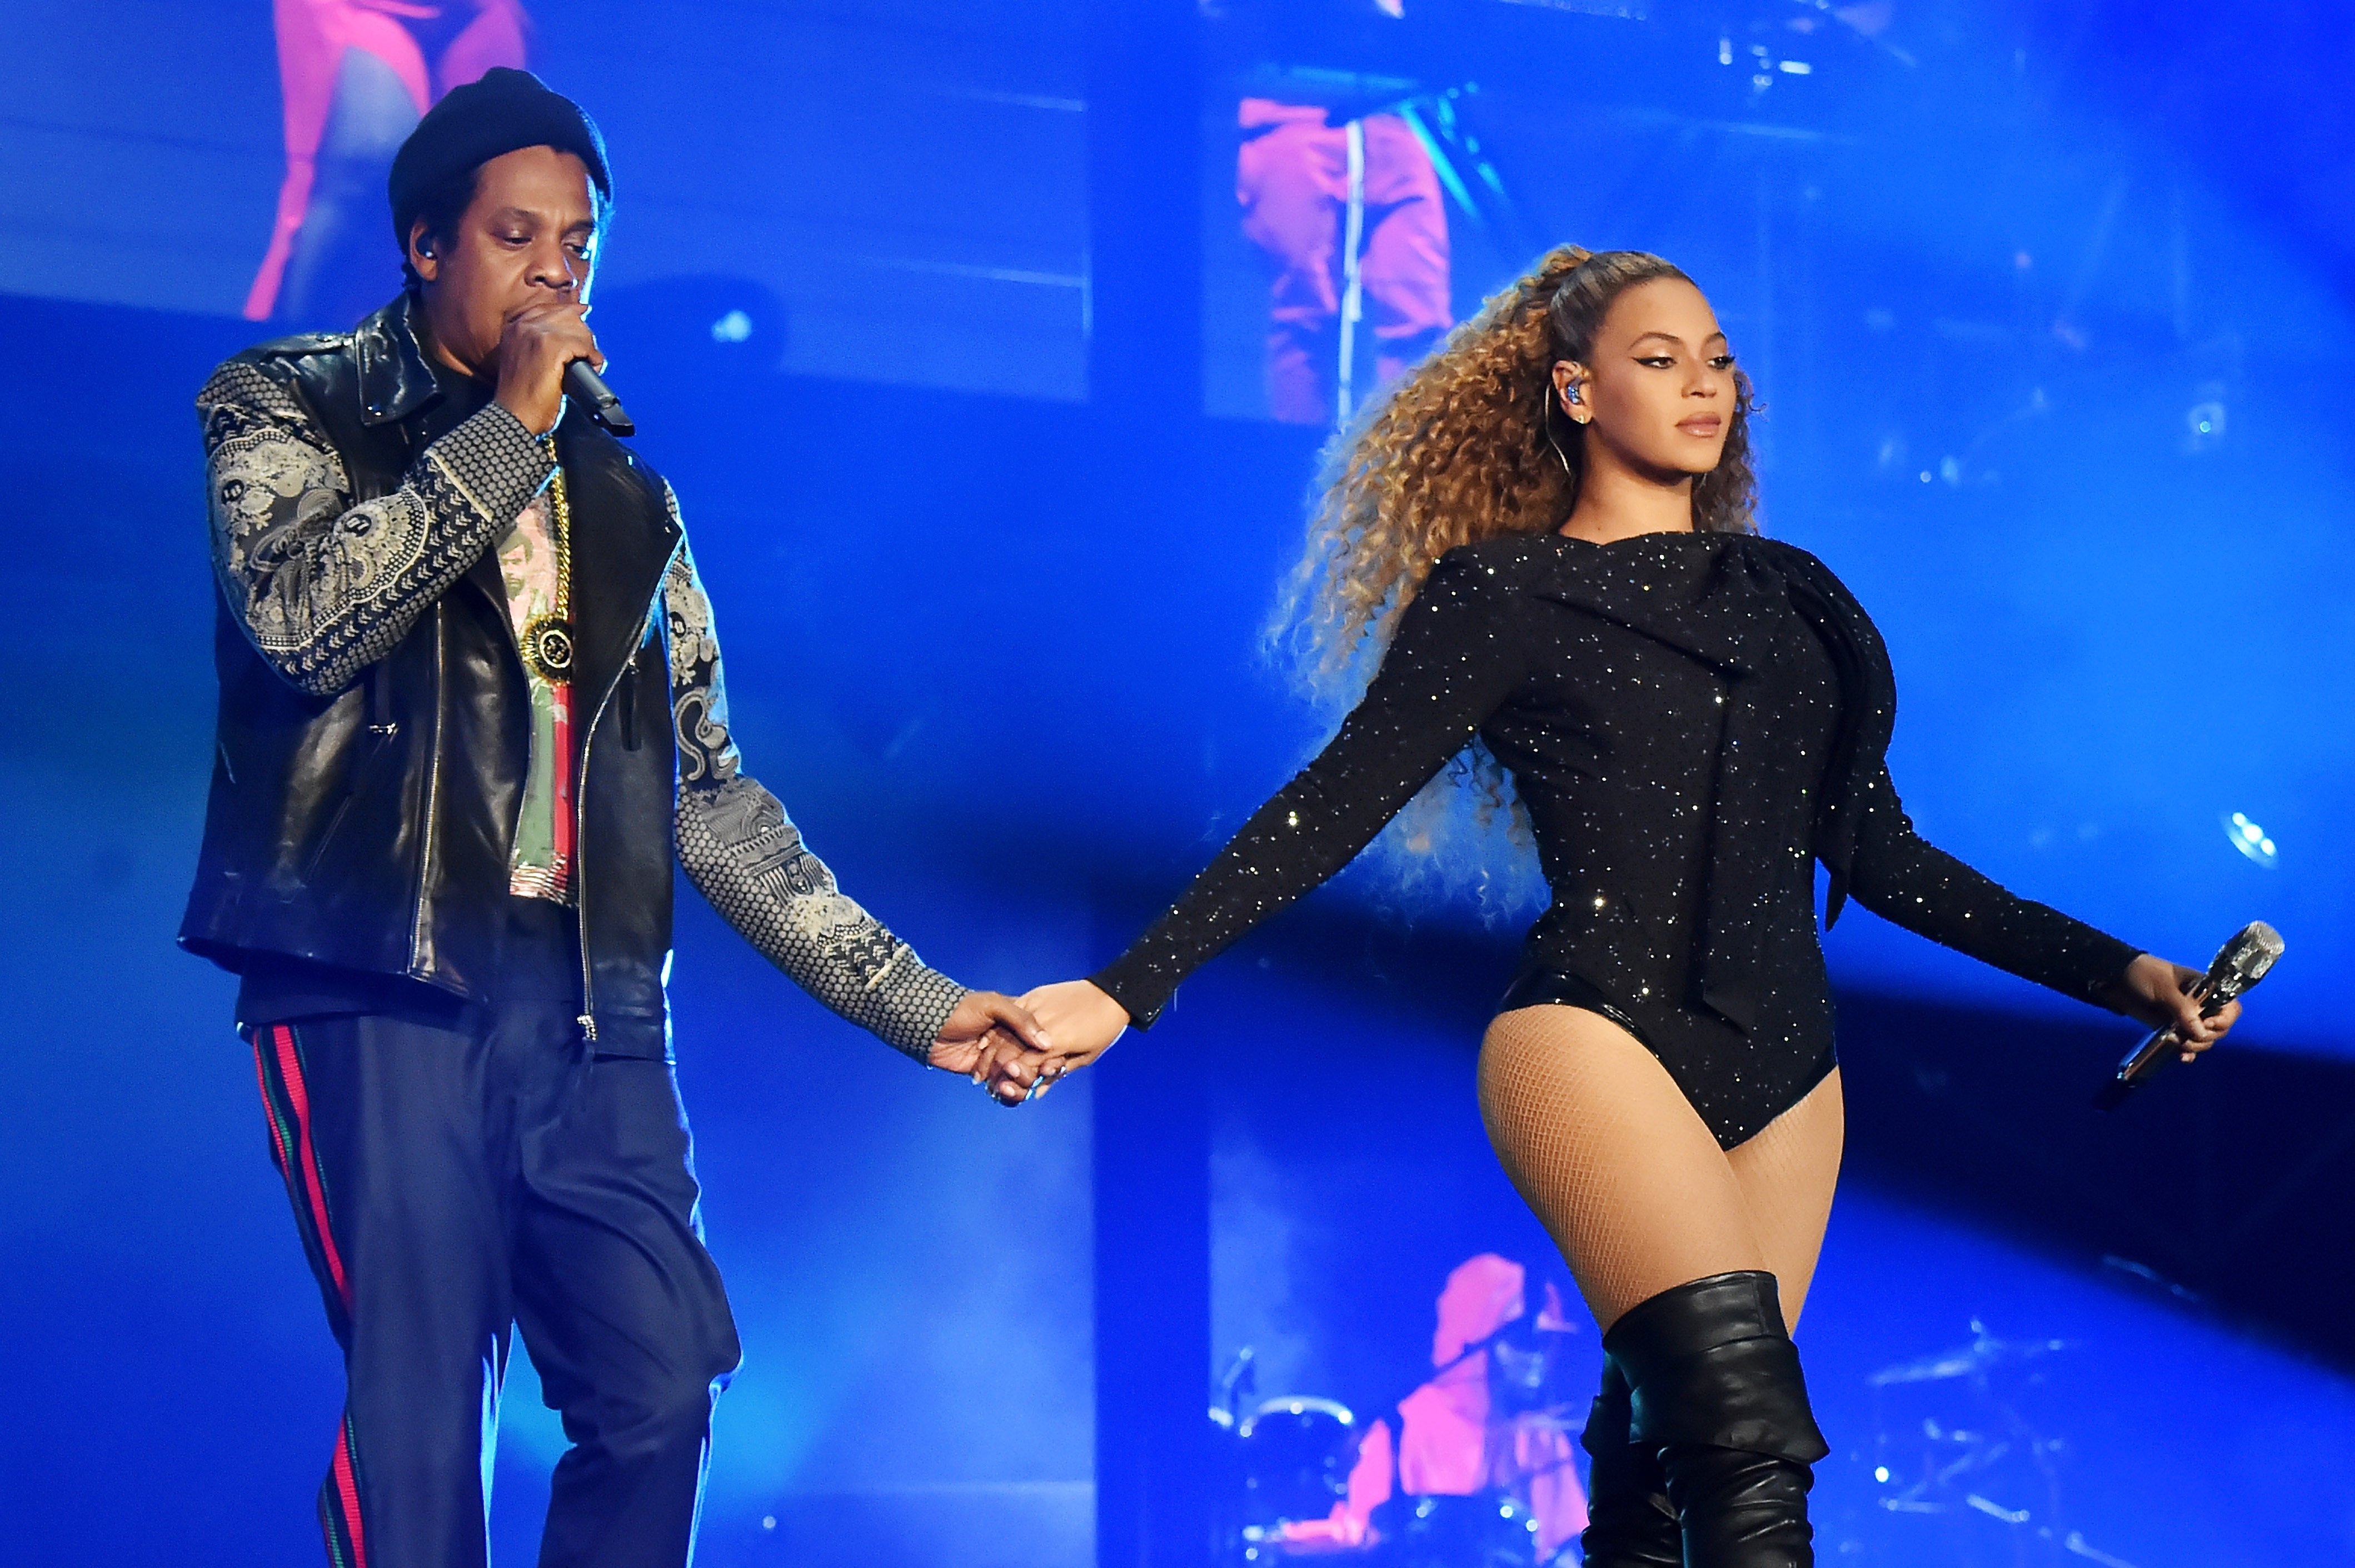 Beyonce and Jay-Z during their "On The Run II" show in Cardiff, Wales in June 2018. | Photo: Getty Images